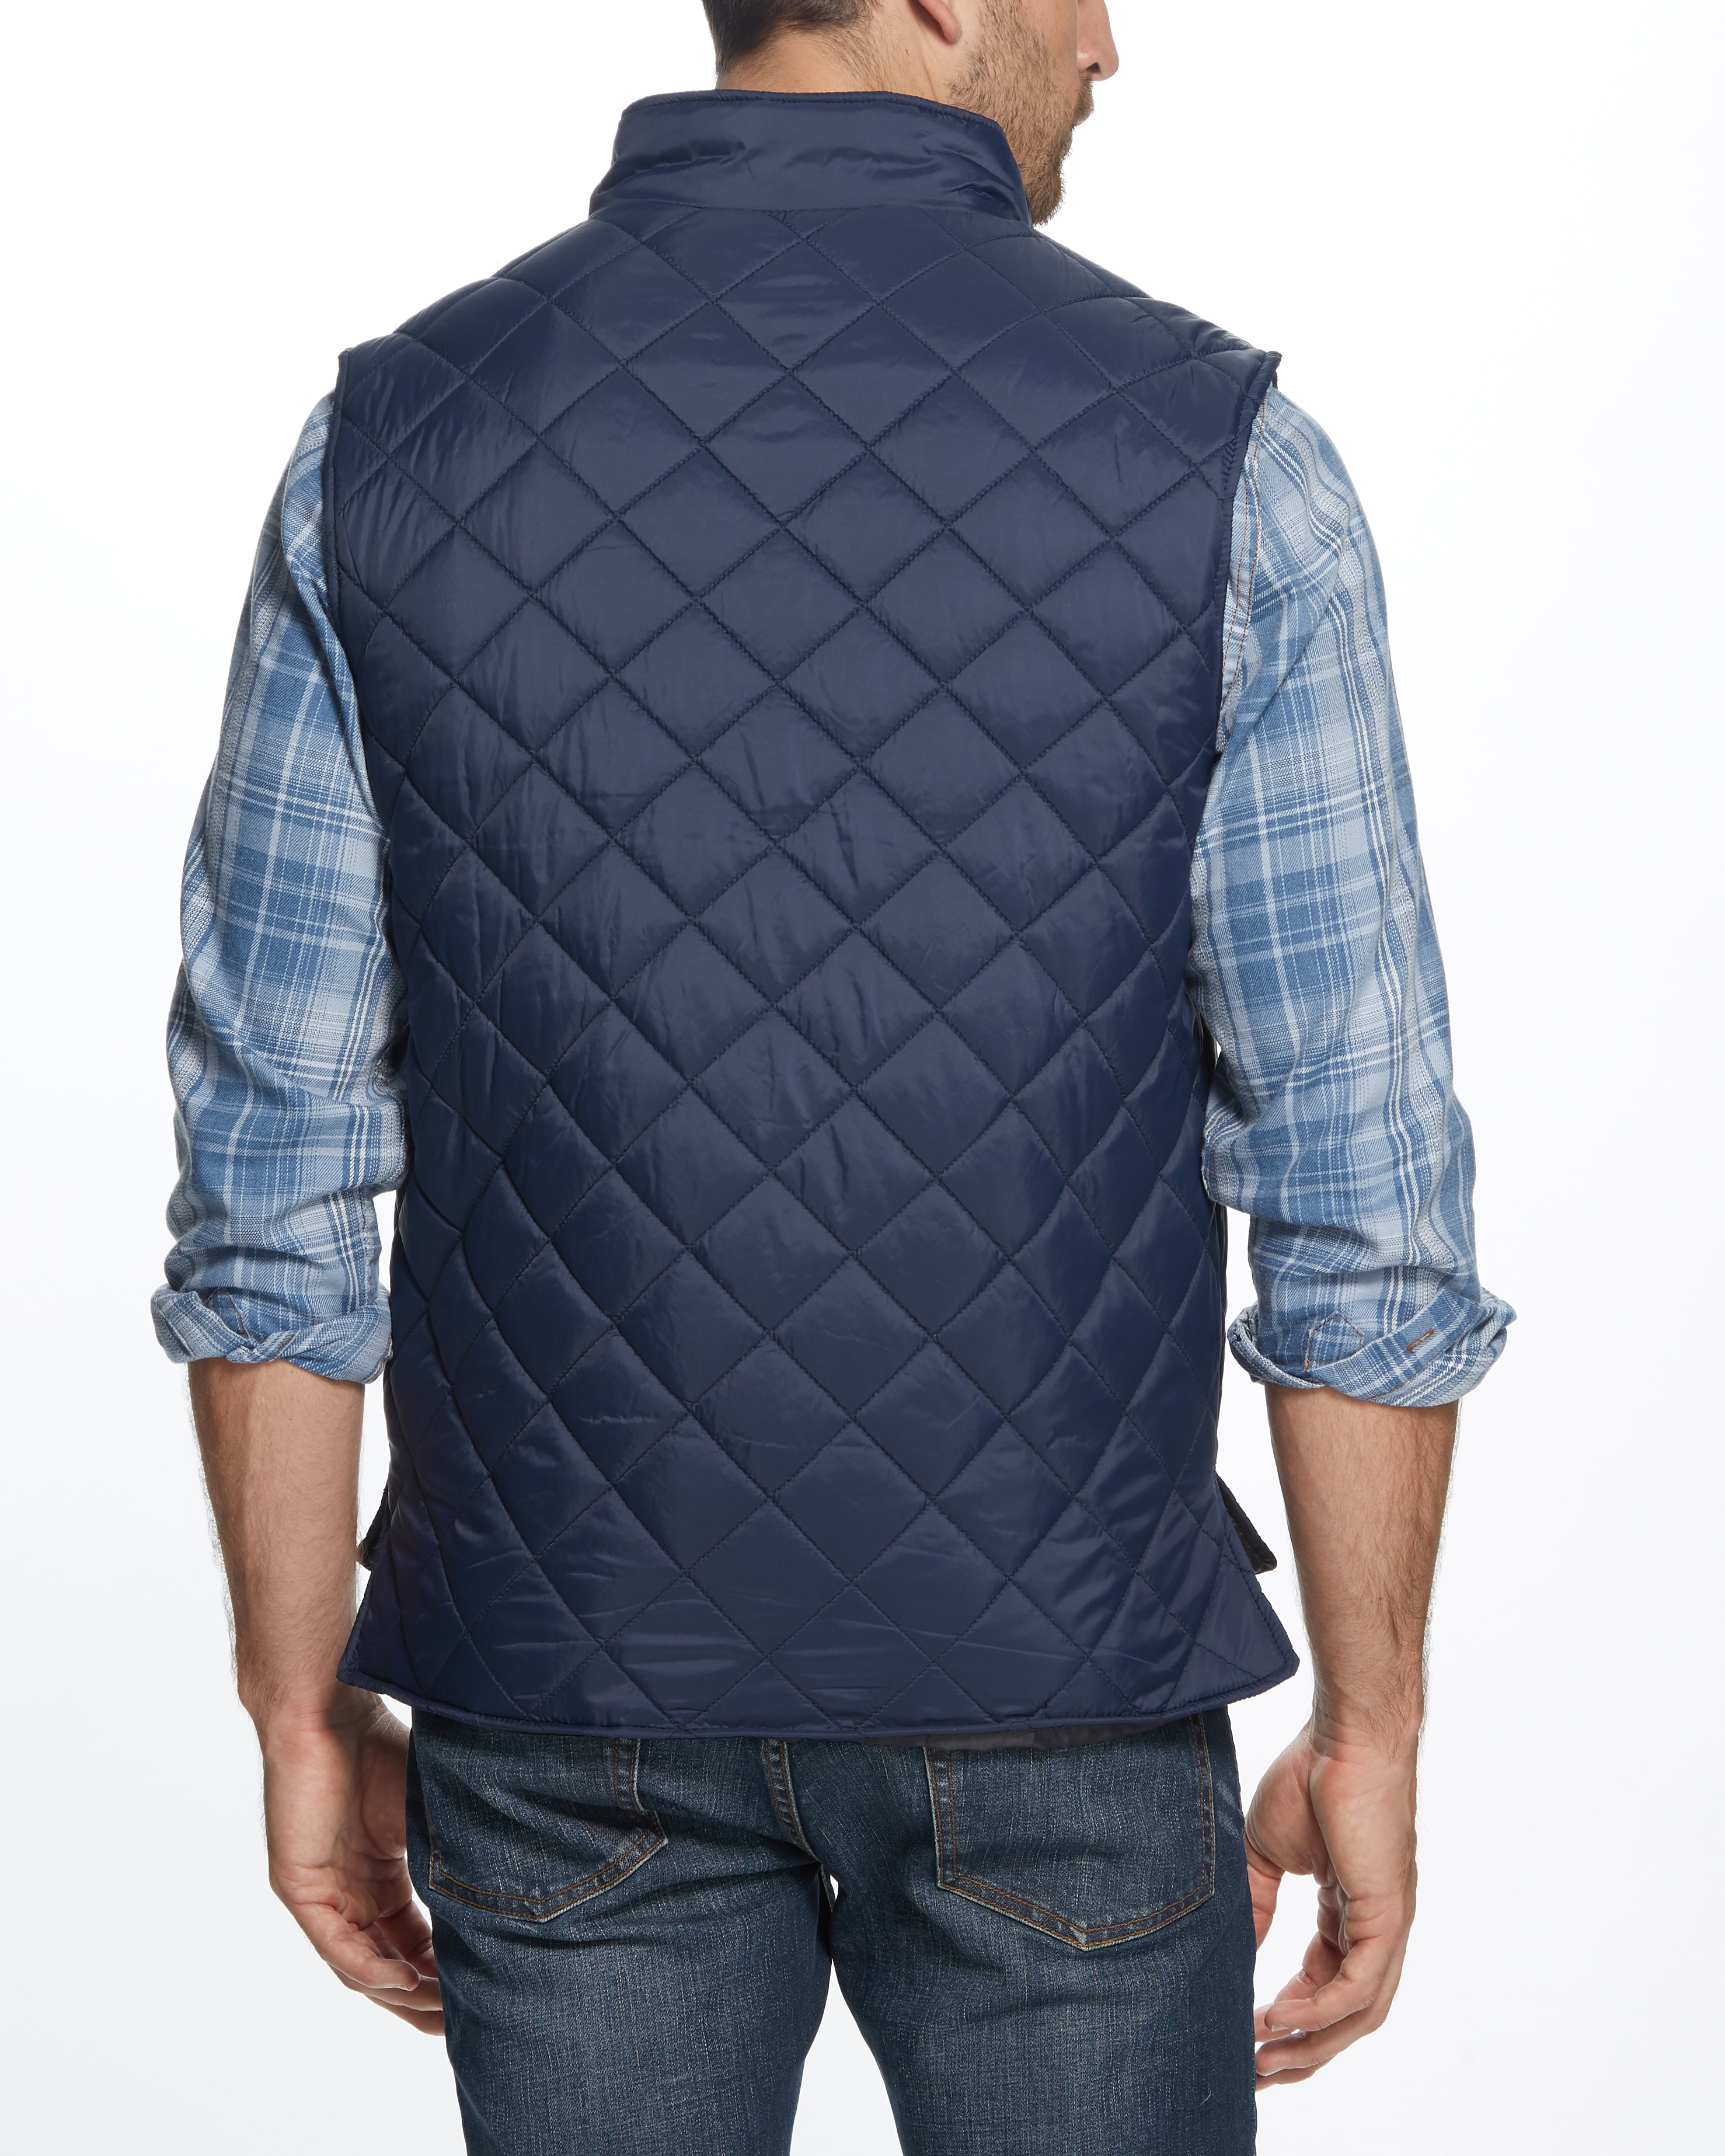 DIAMOND QUILTED VEST IN NAVY